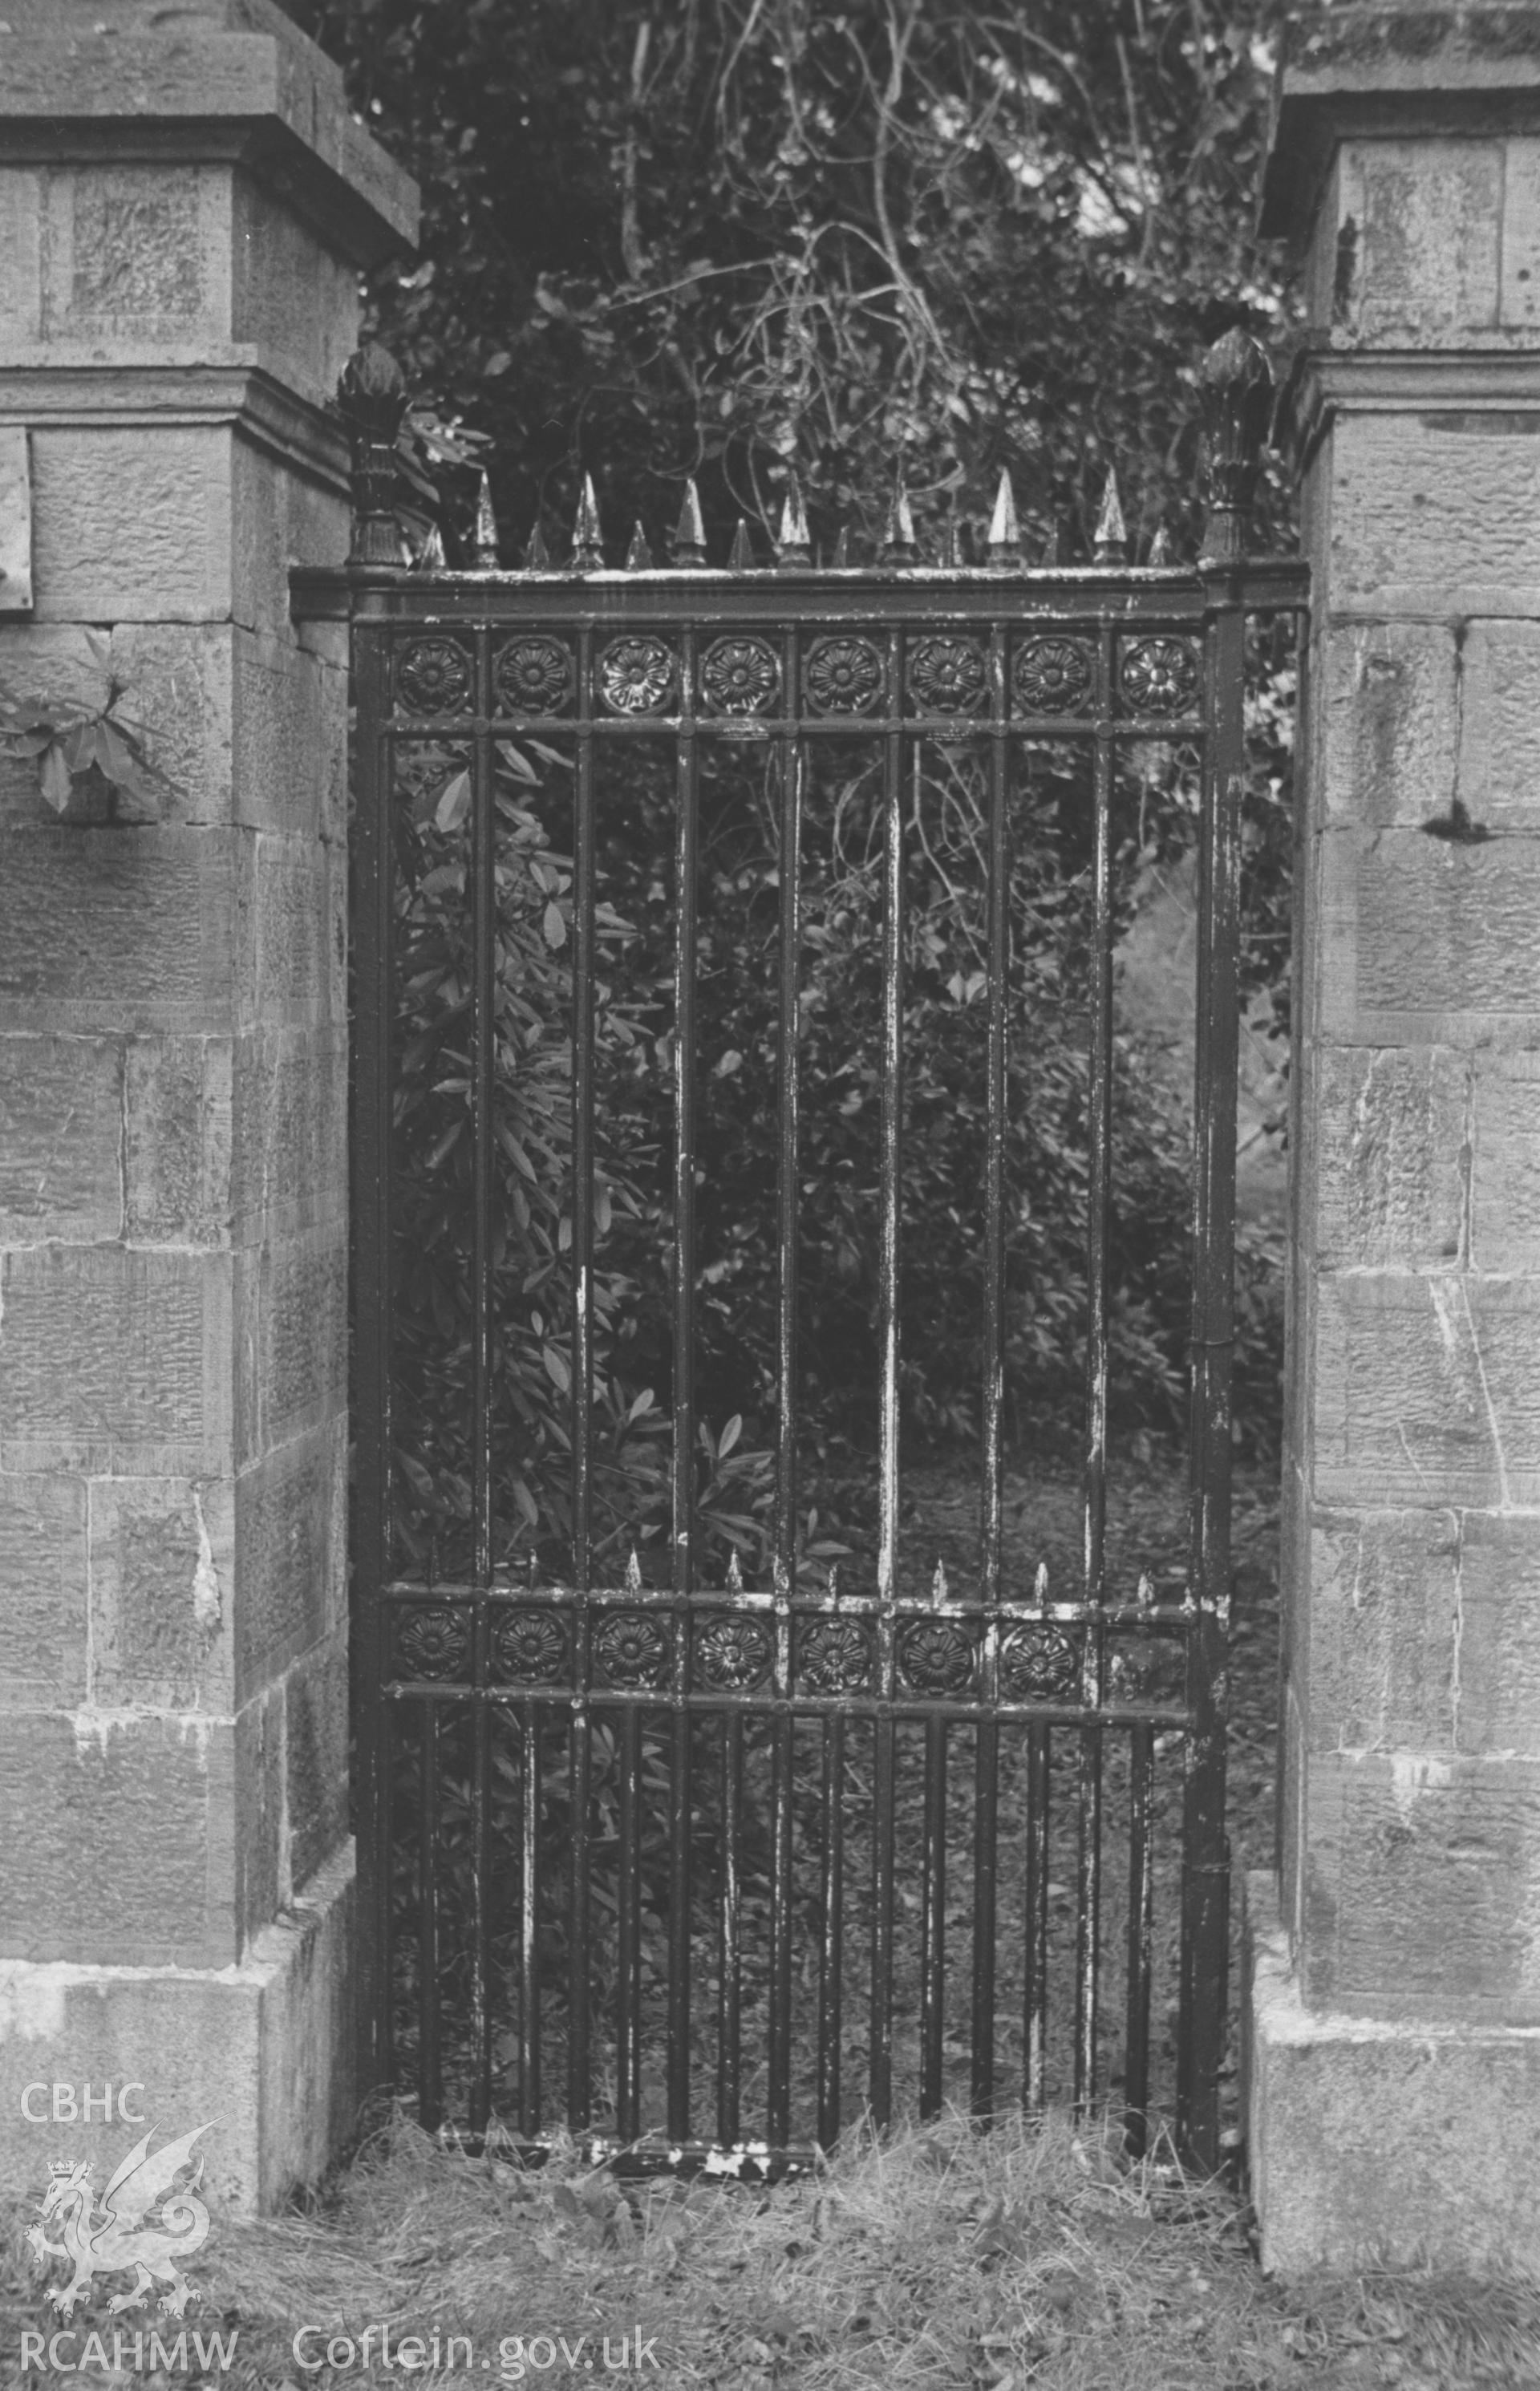 Digital copy of a black and white negative showing the west gate in the south gateway of Trawscoed mansion gates. Photographed by Arthur O. Chater on 17th January 1968 looking north north west from Grid Reference SN 672 727.